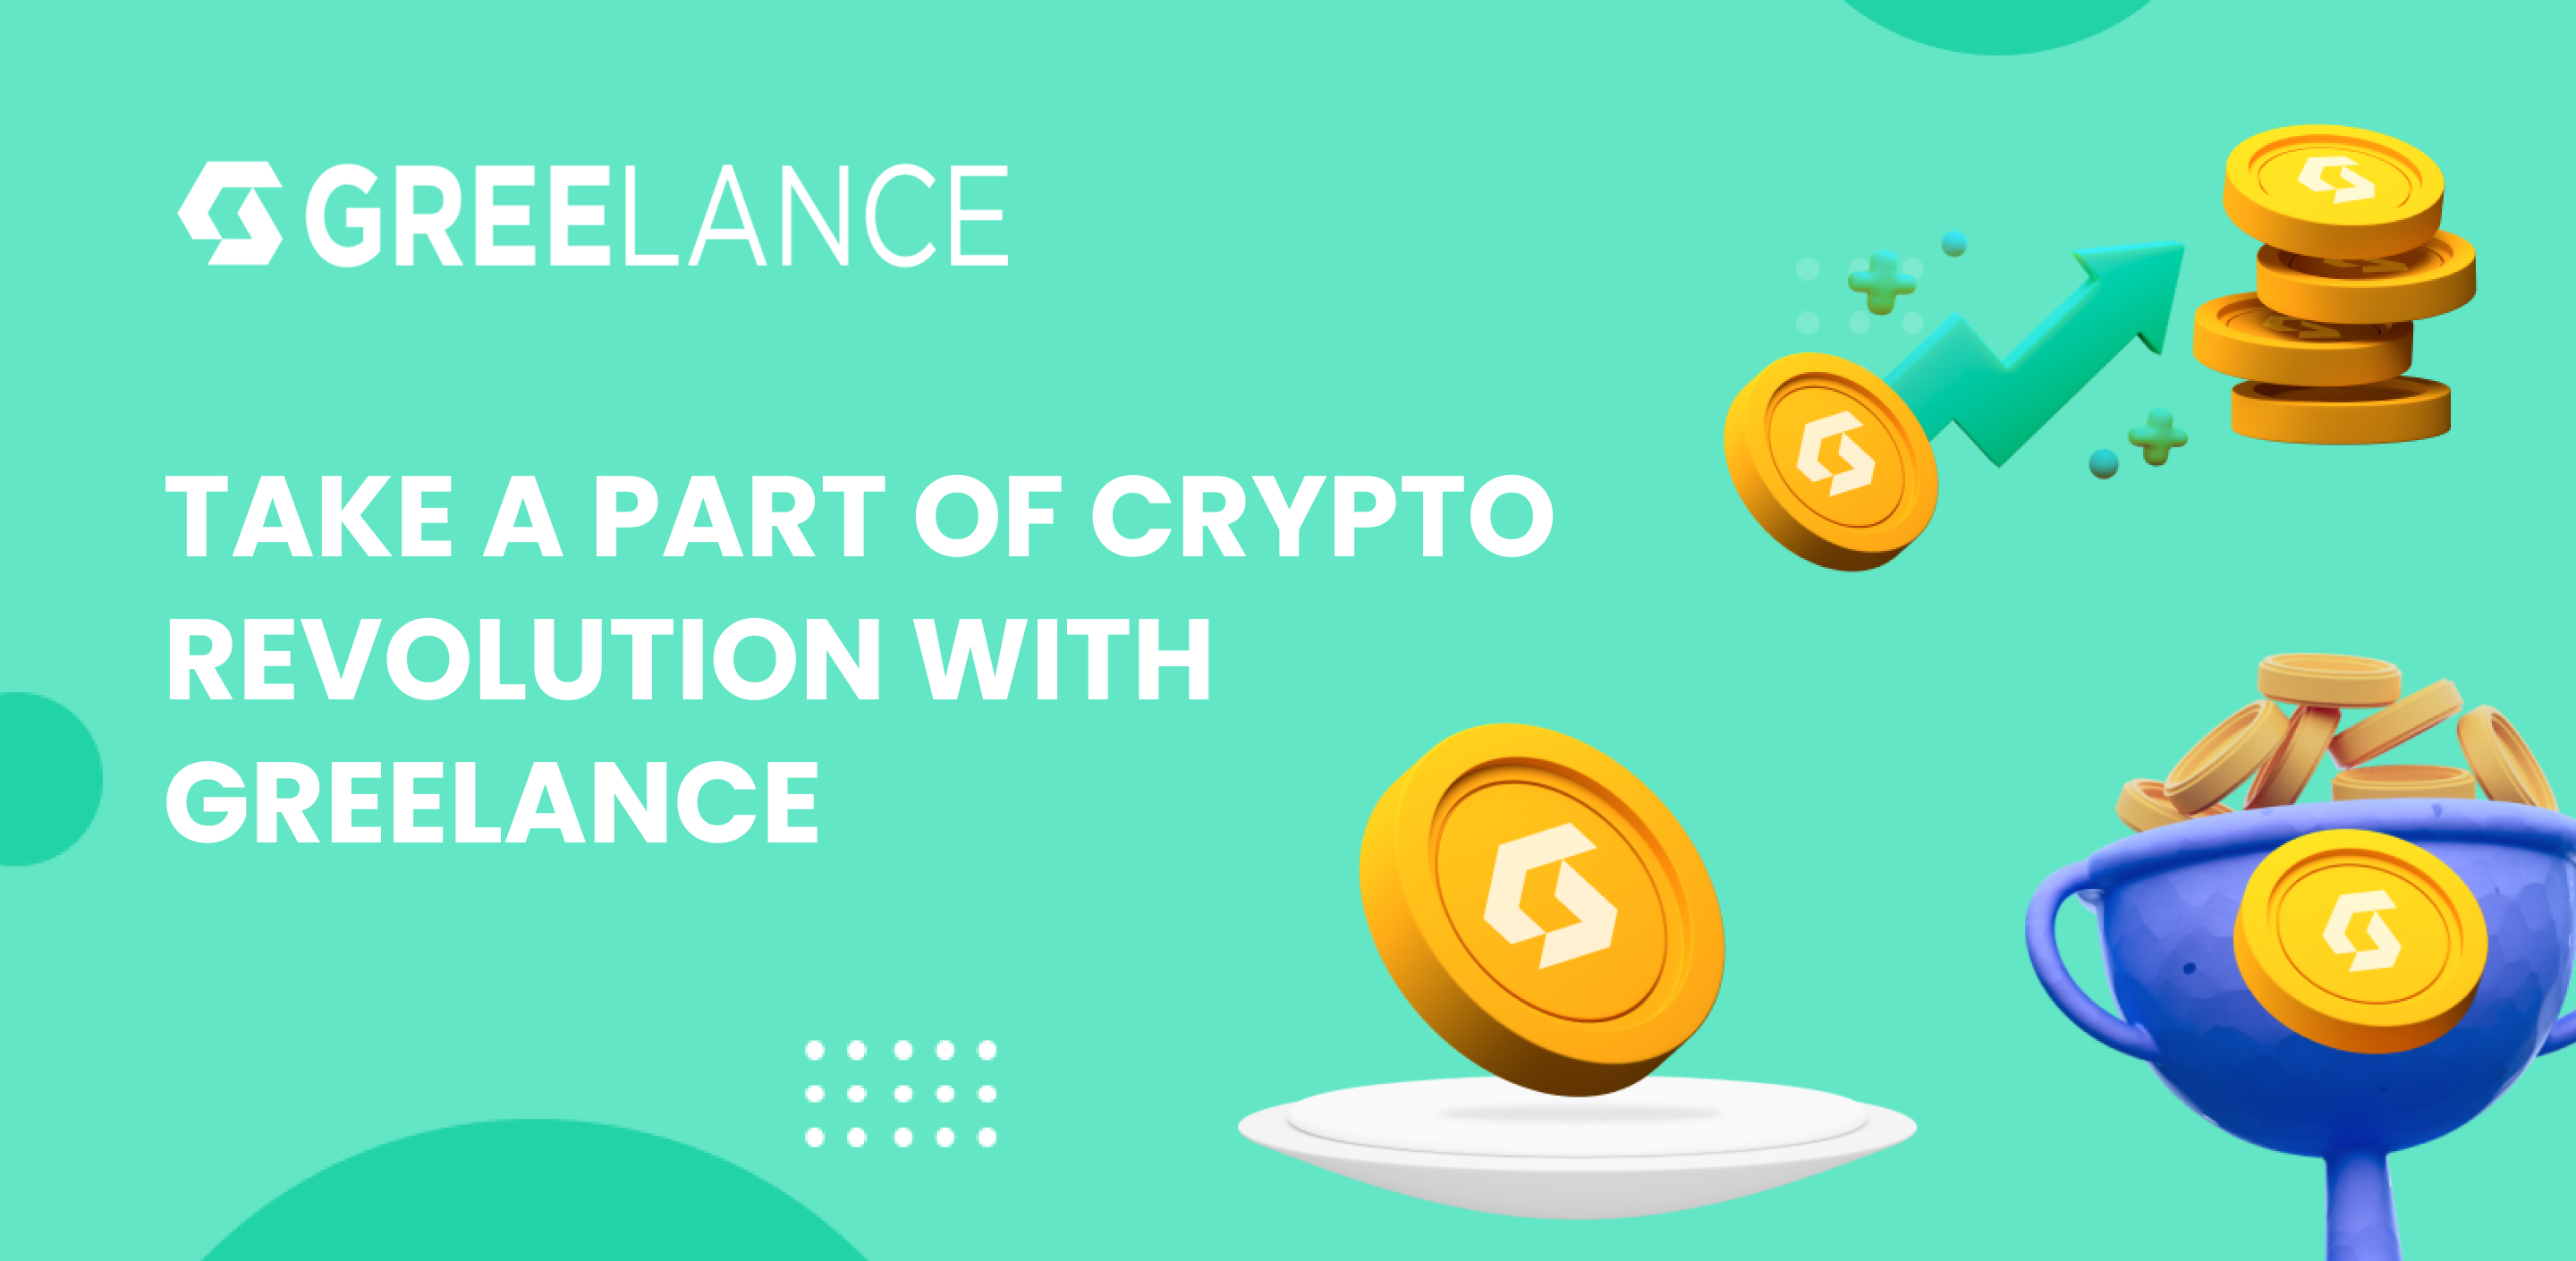 Join to crypto revolution with Greelance!